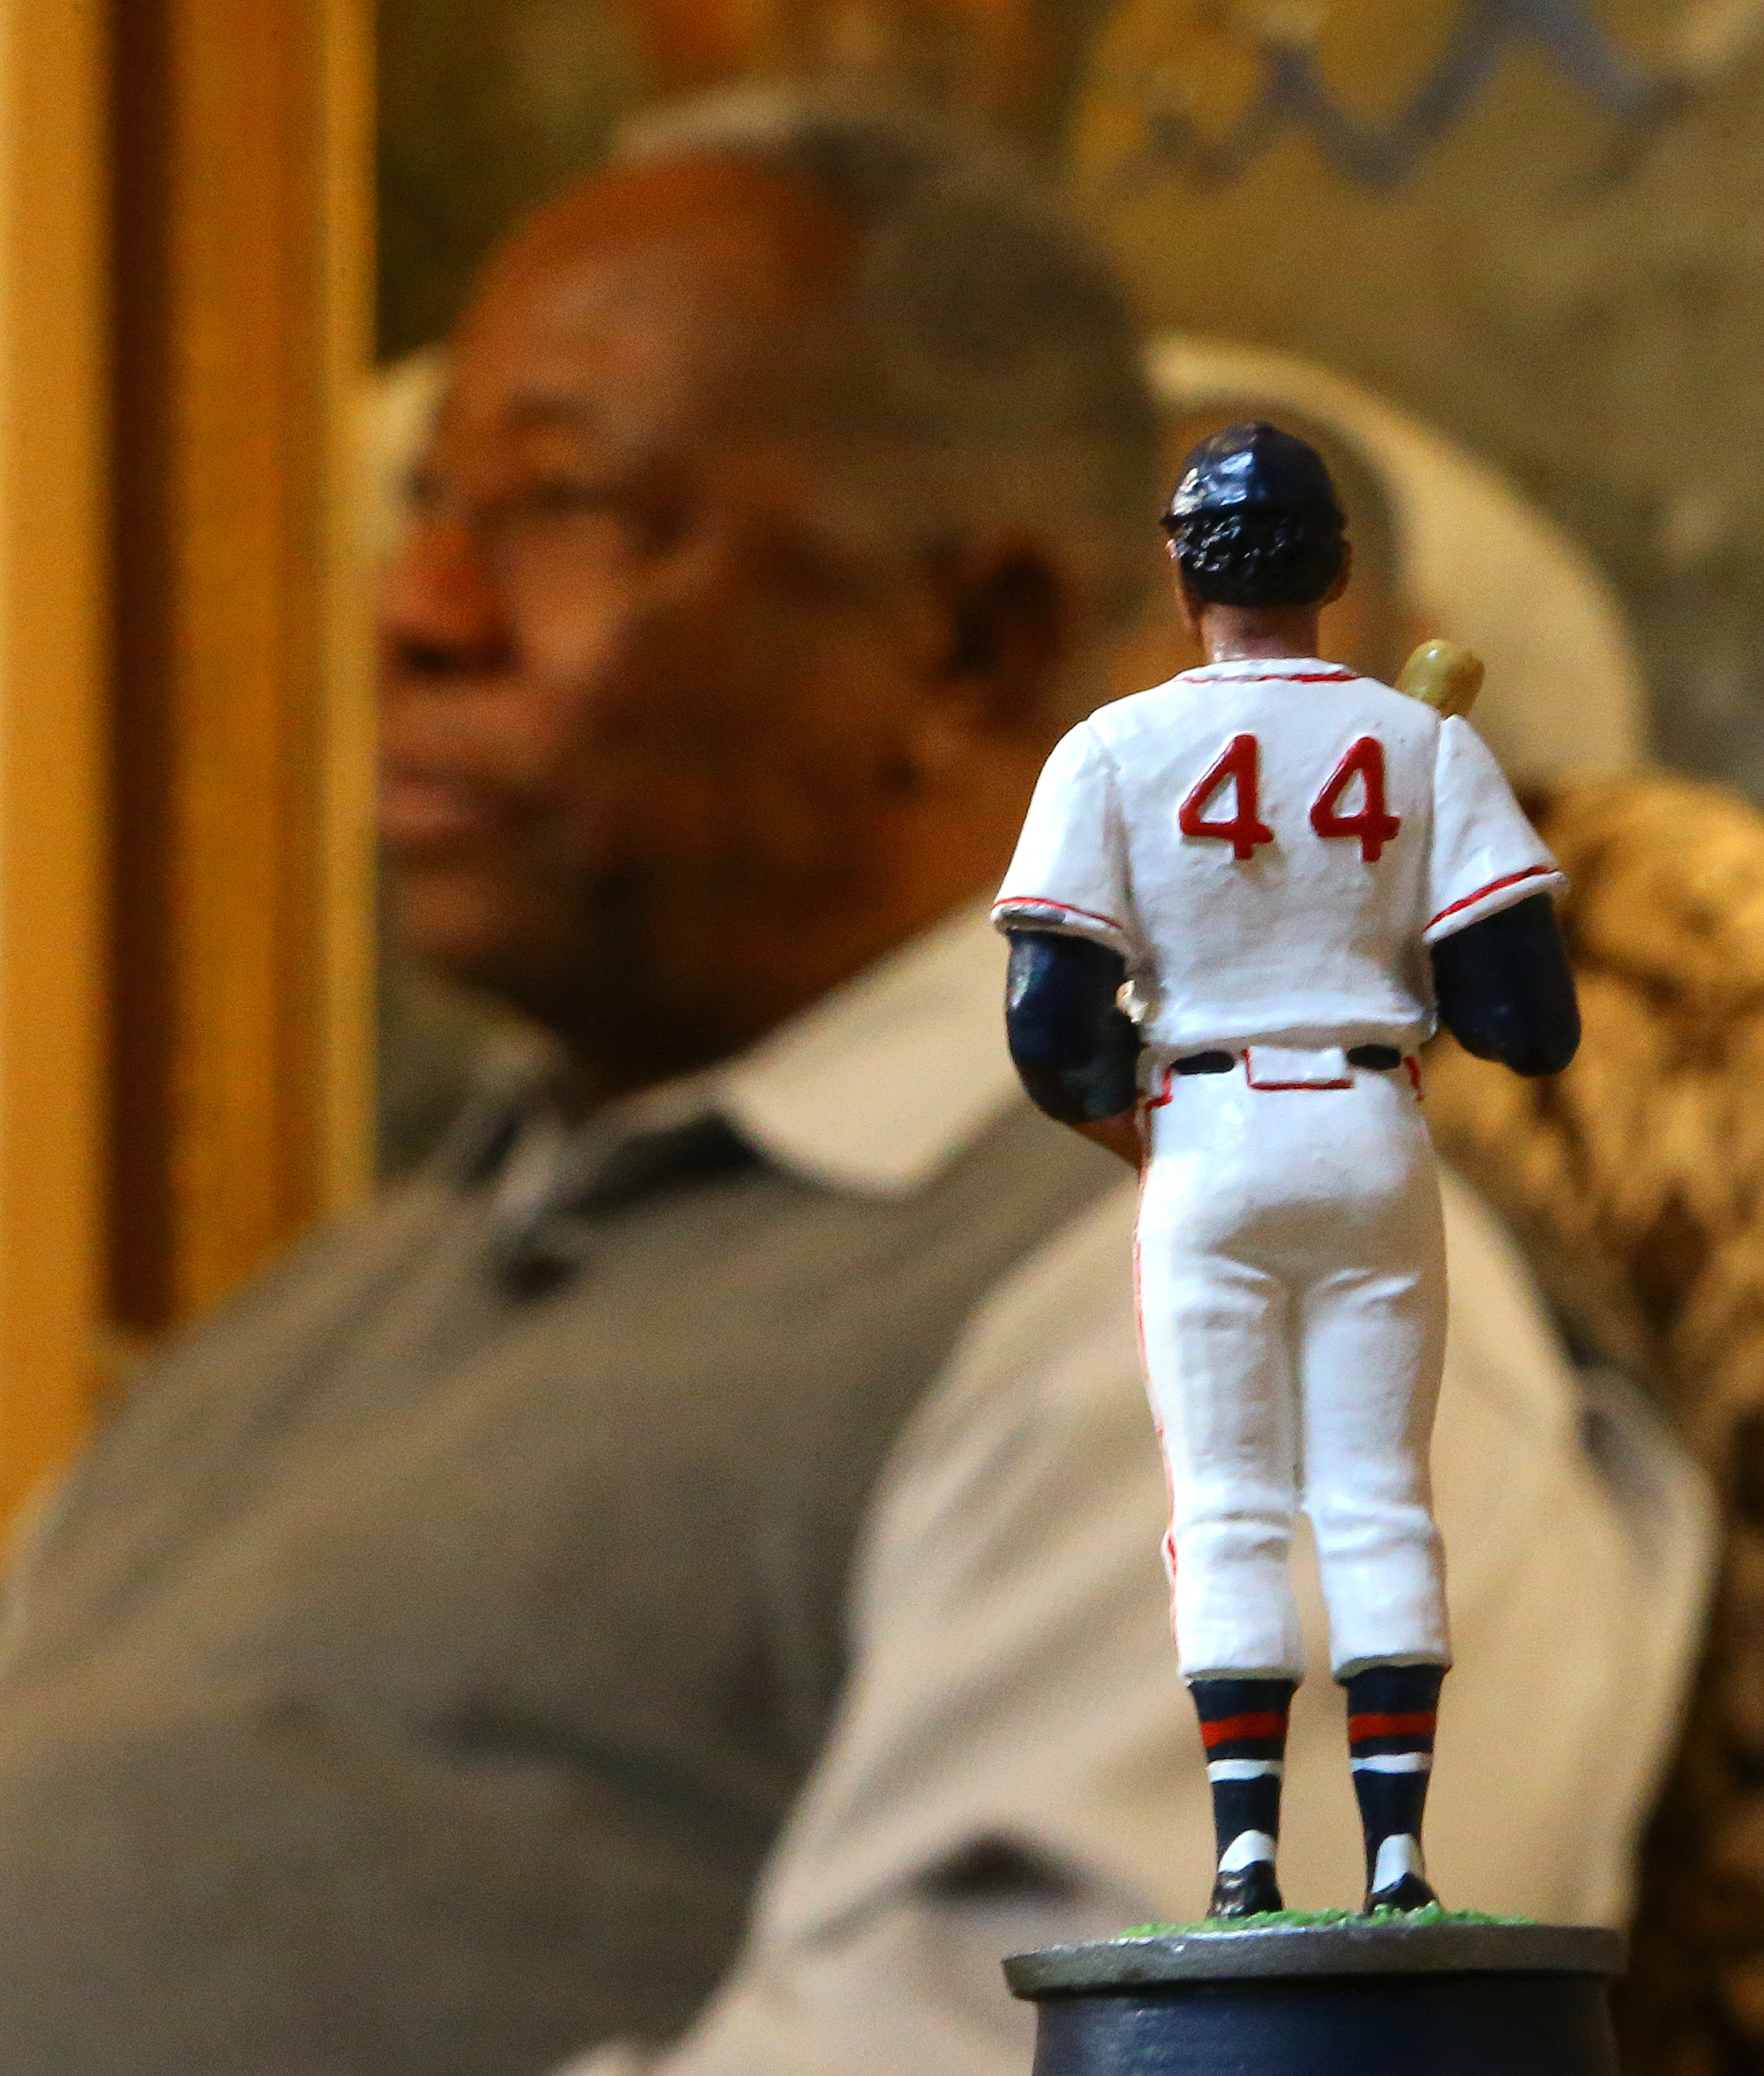 MLB - We remember everything the late, great Hank Aaron